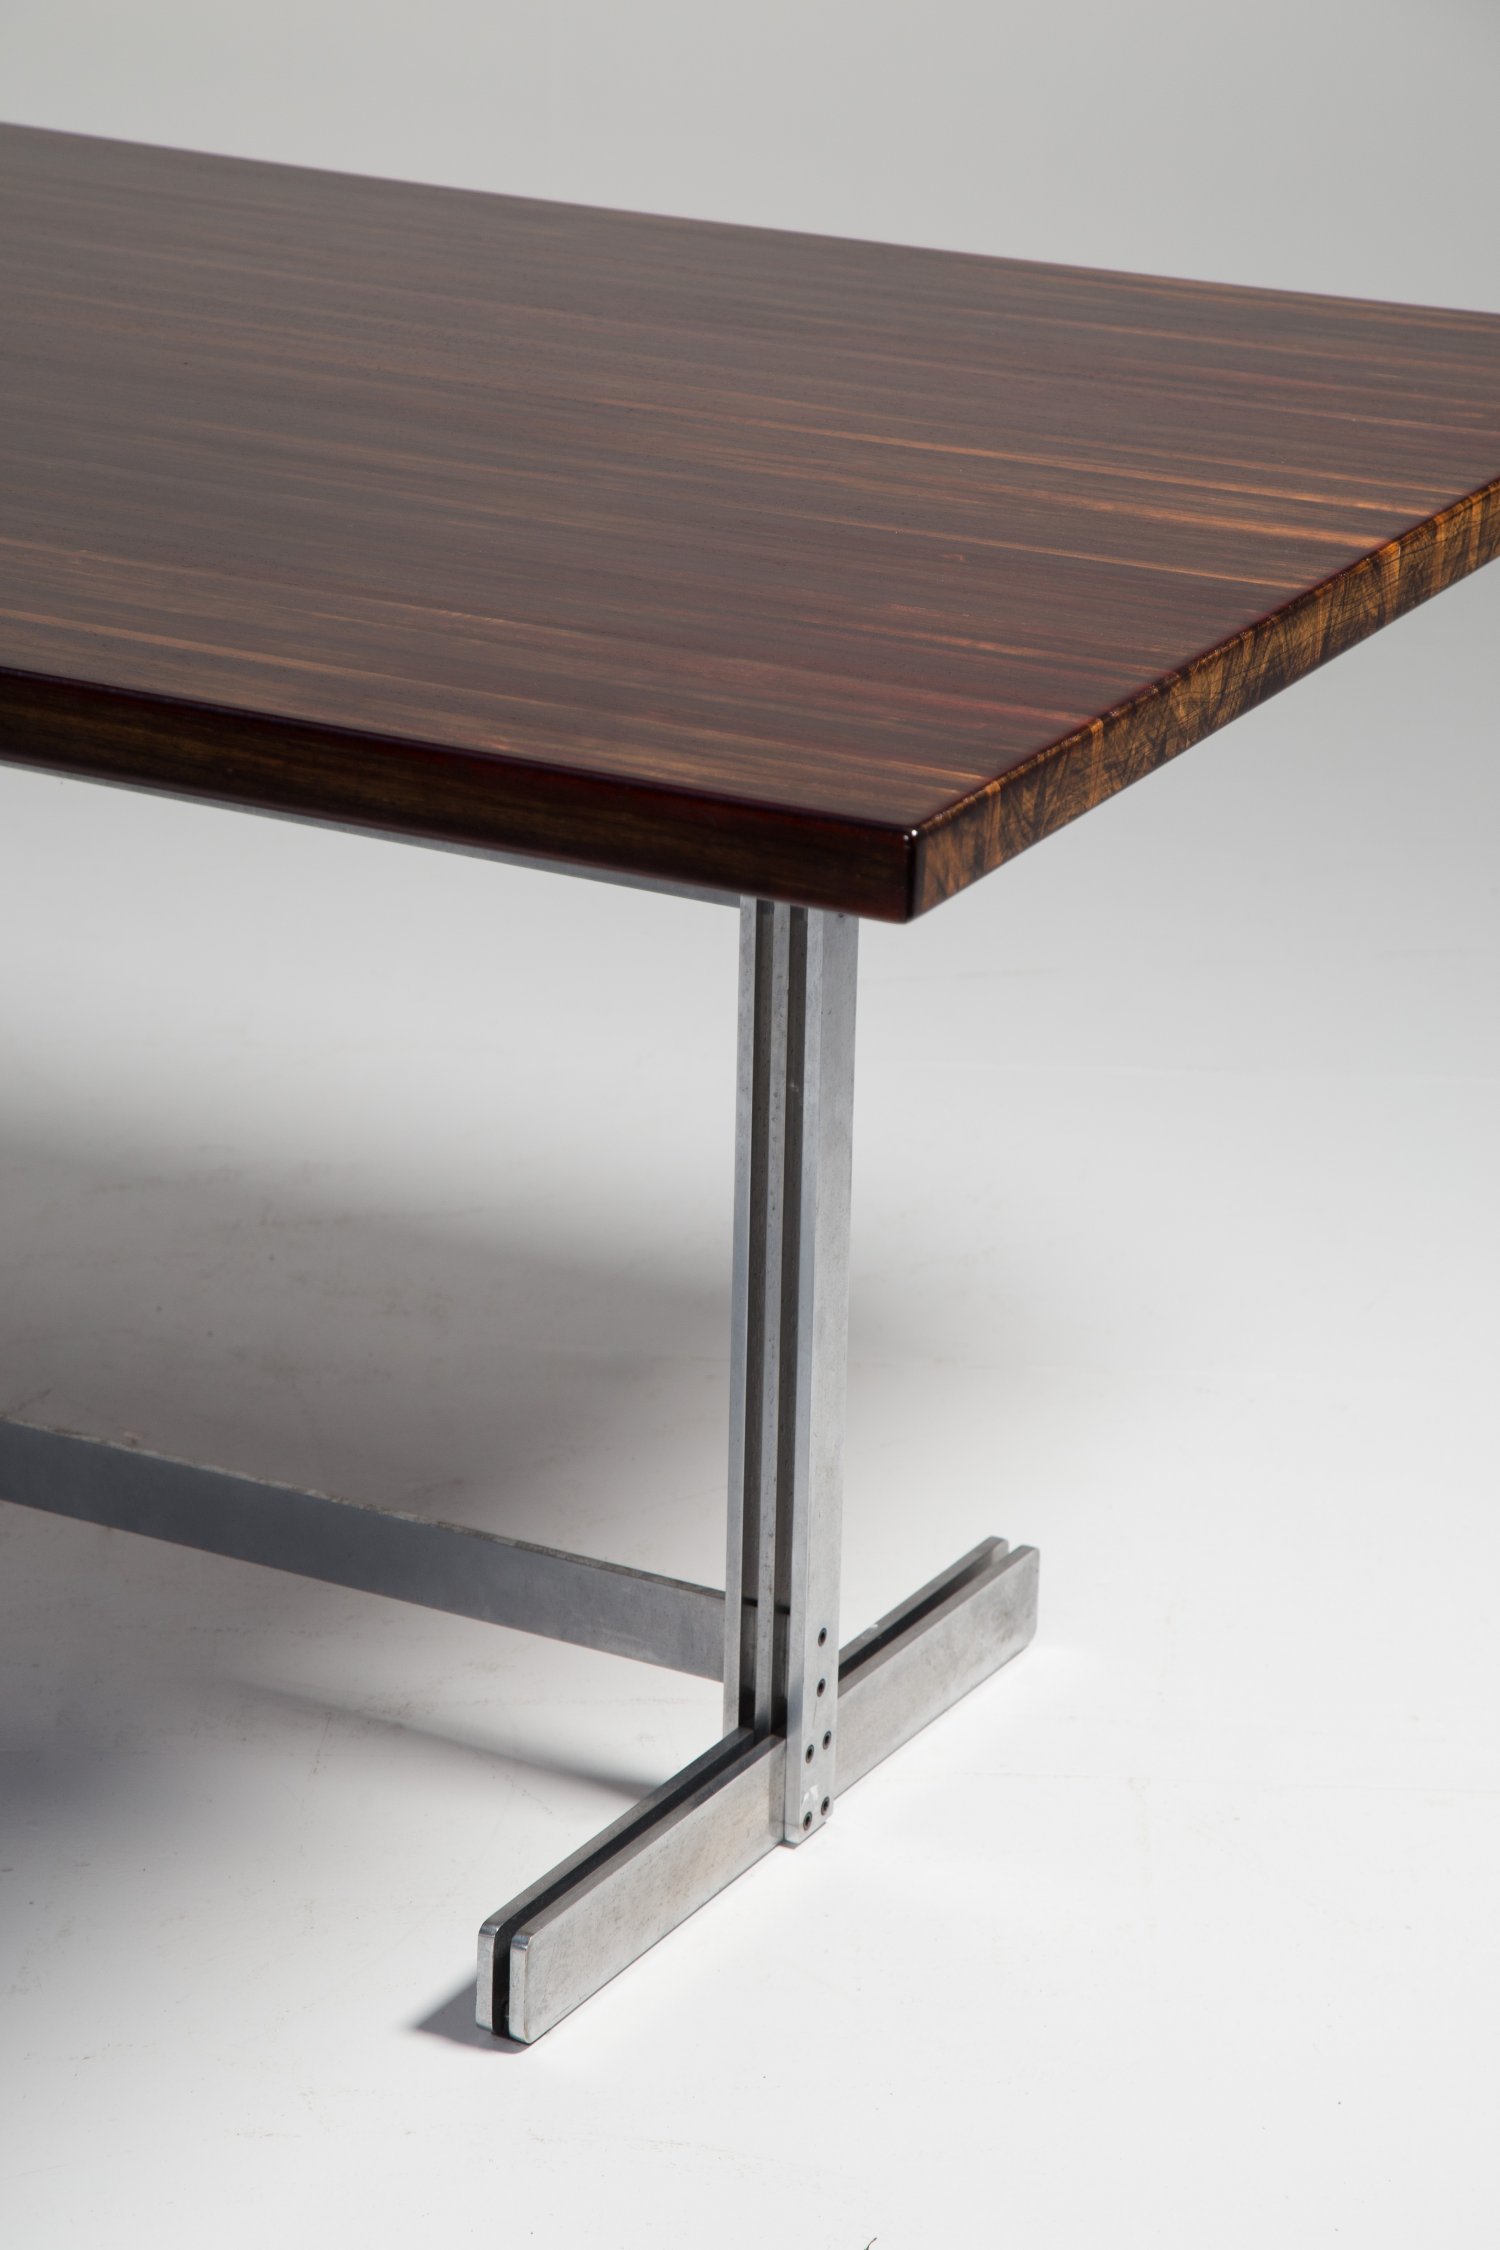 Jules Wabbes Dining Table or Desk 